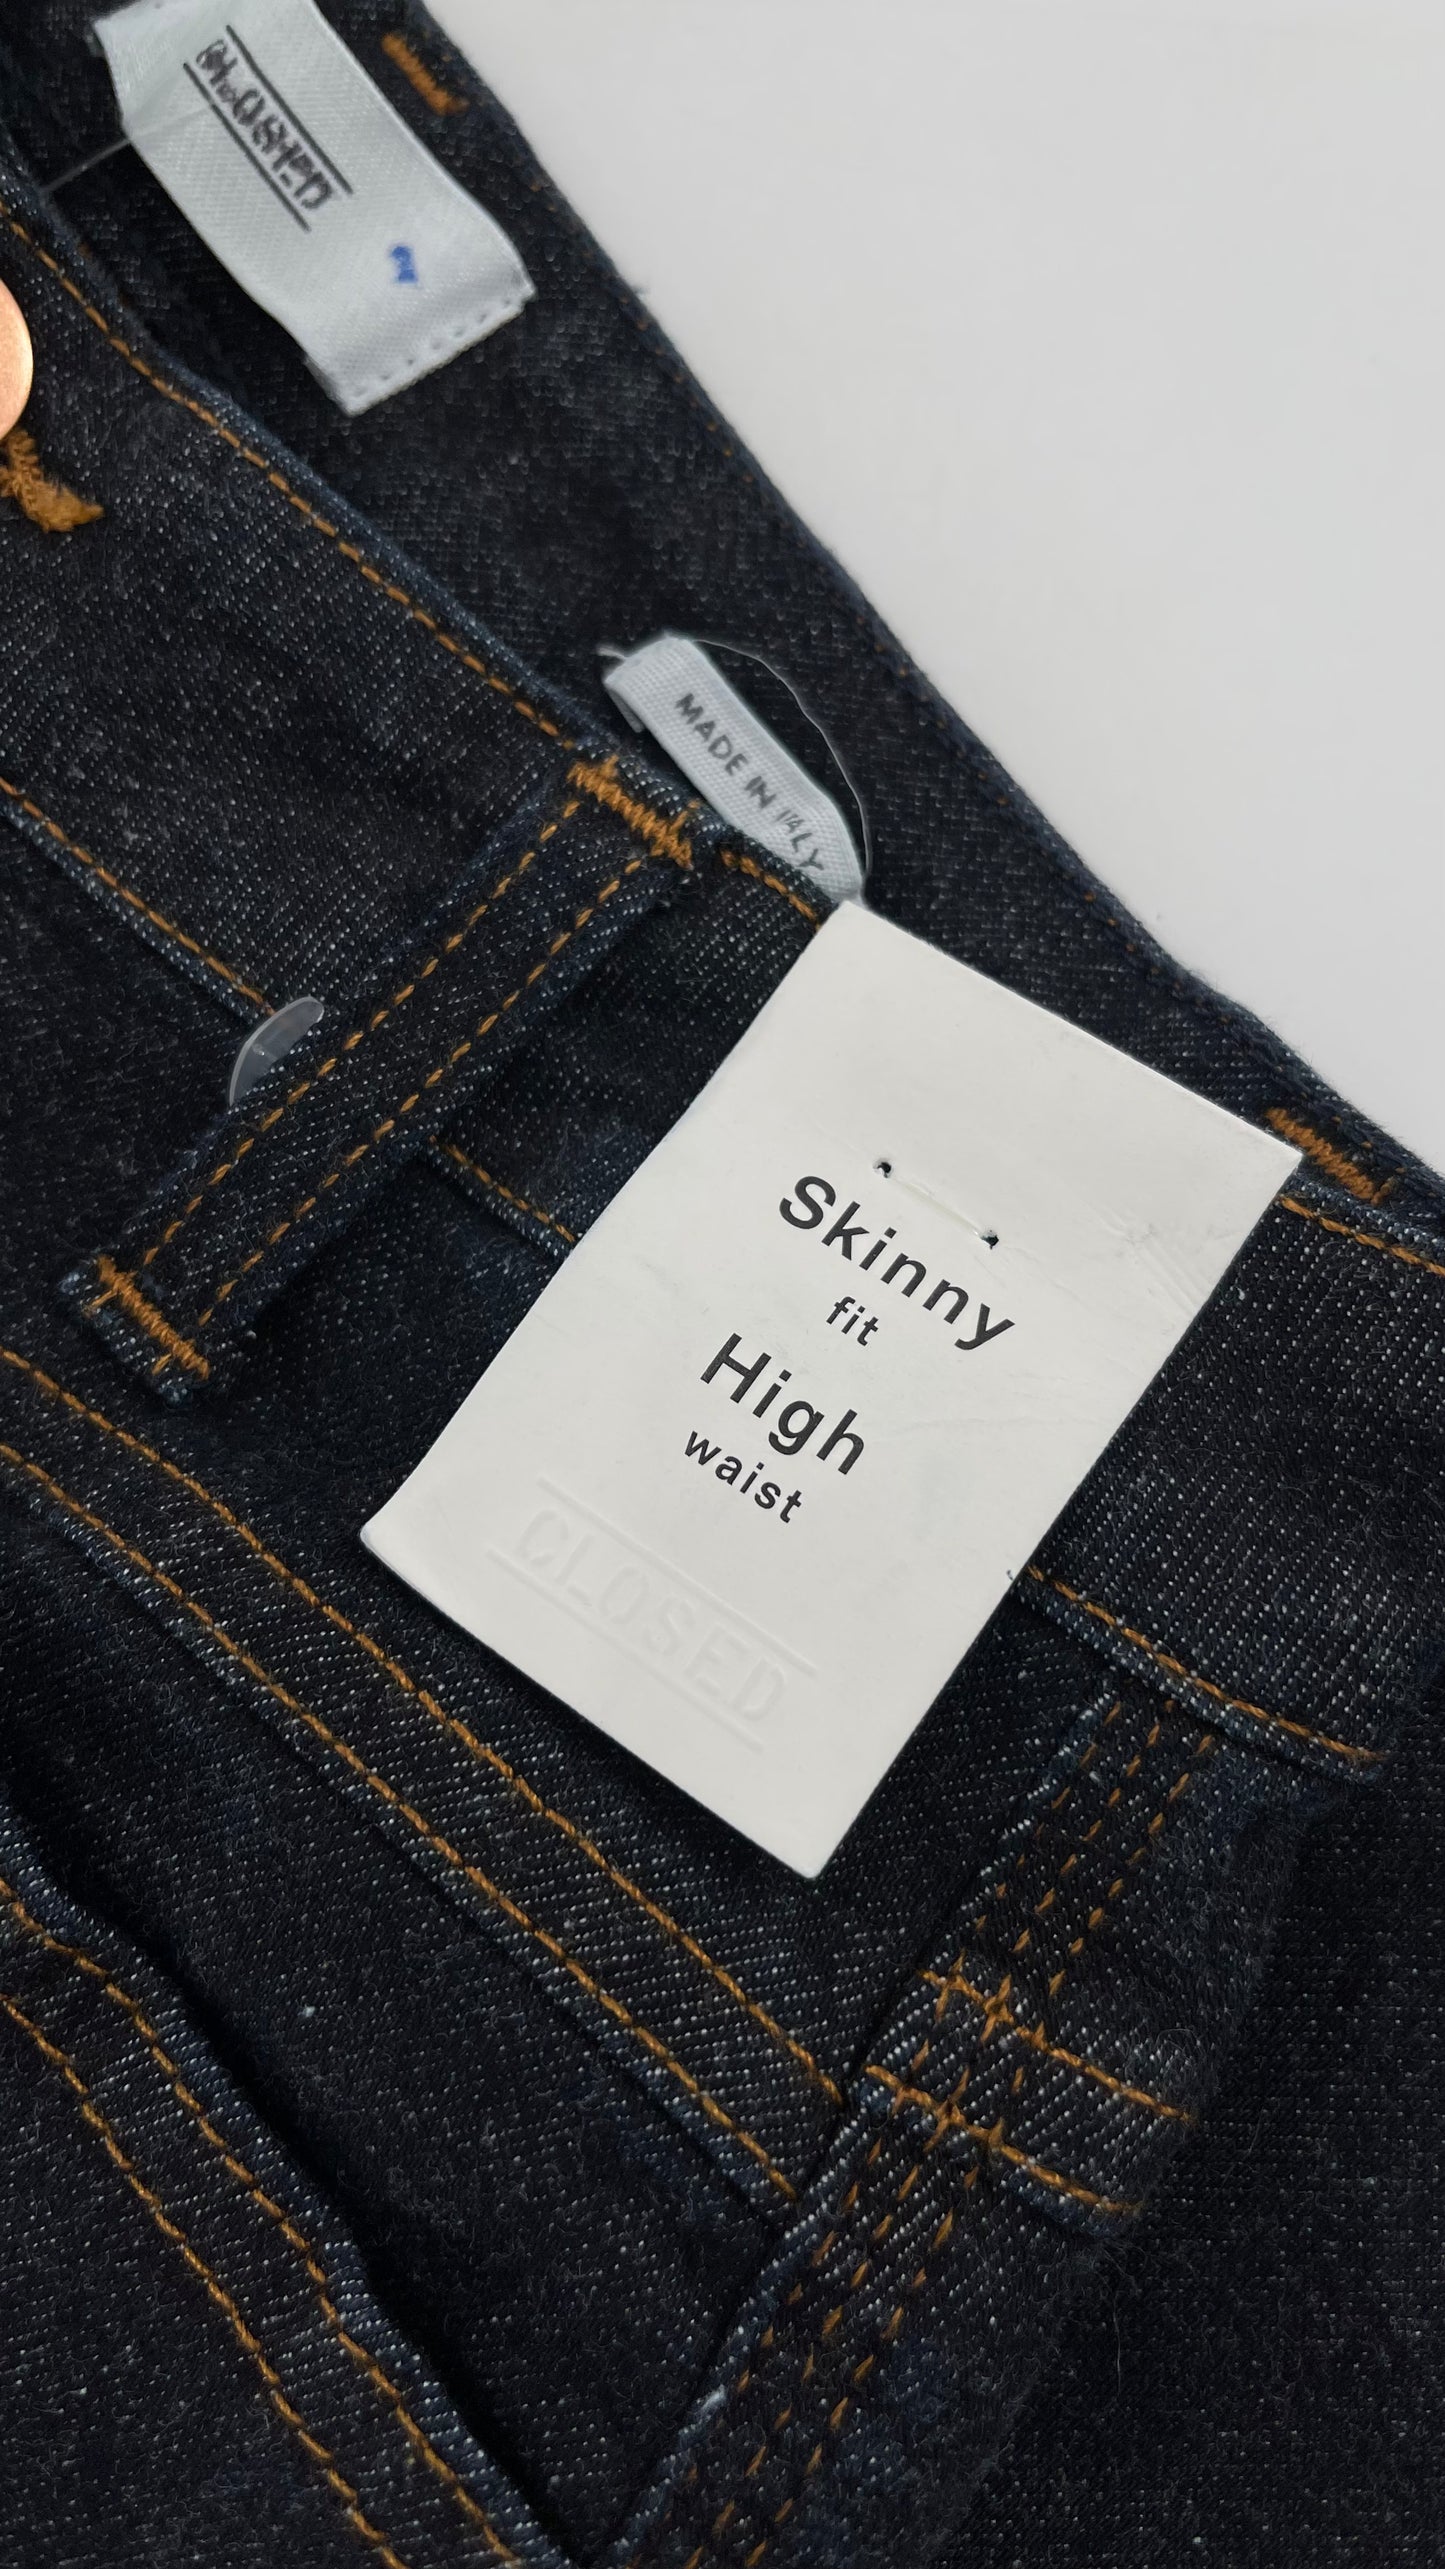 CLOSED Skinny Fit High Waist Jeans - Made in Italy- with Tags (Size 24)